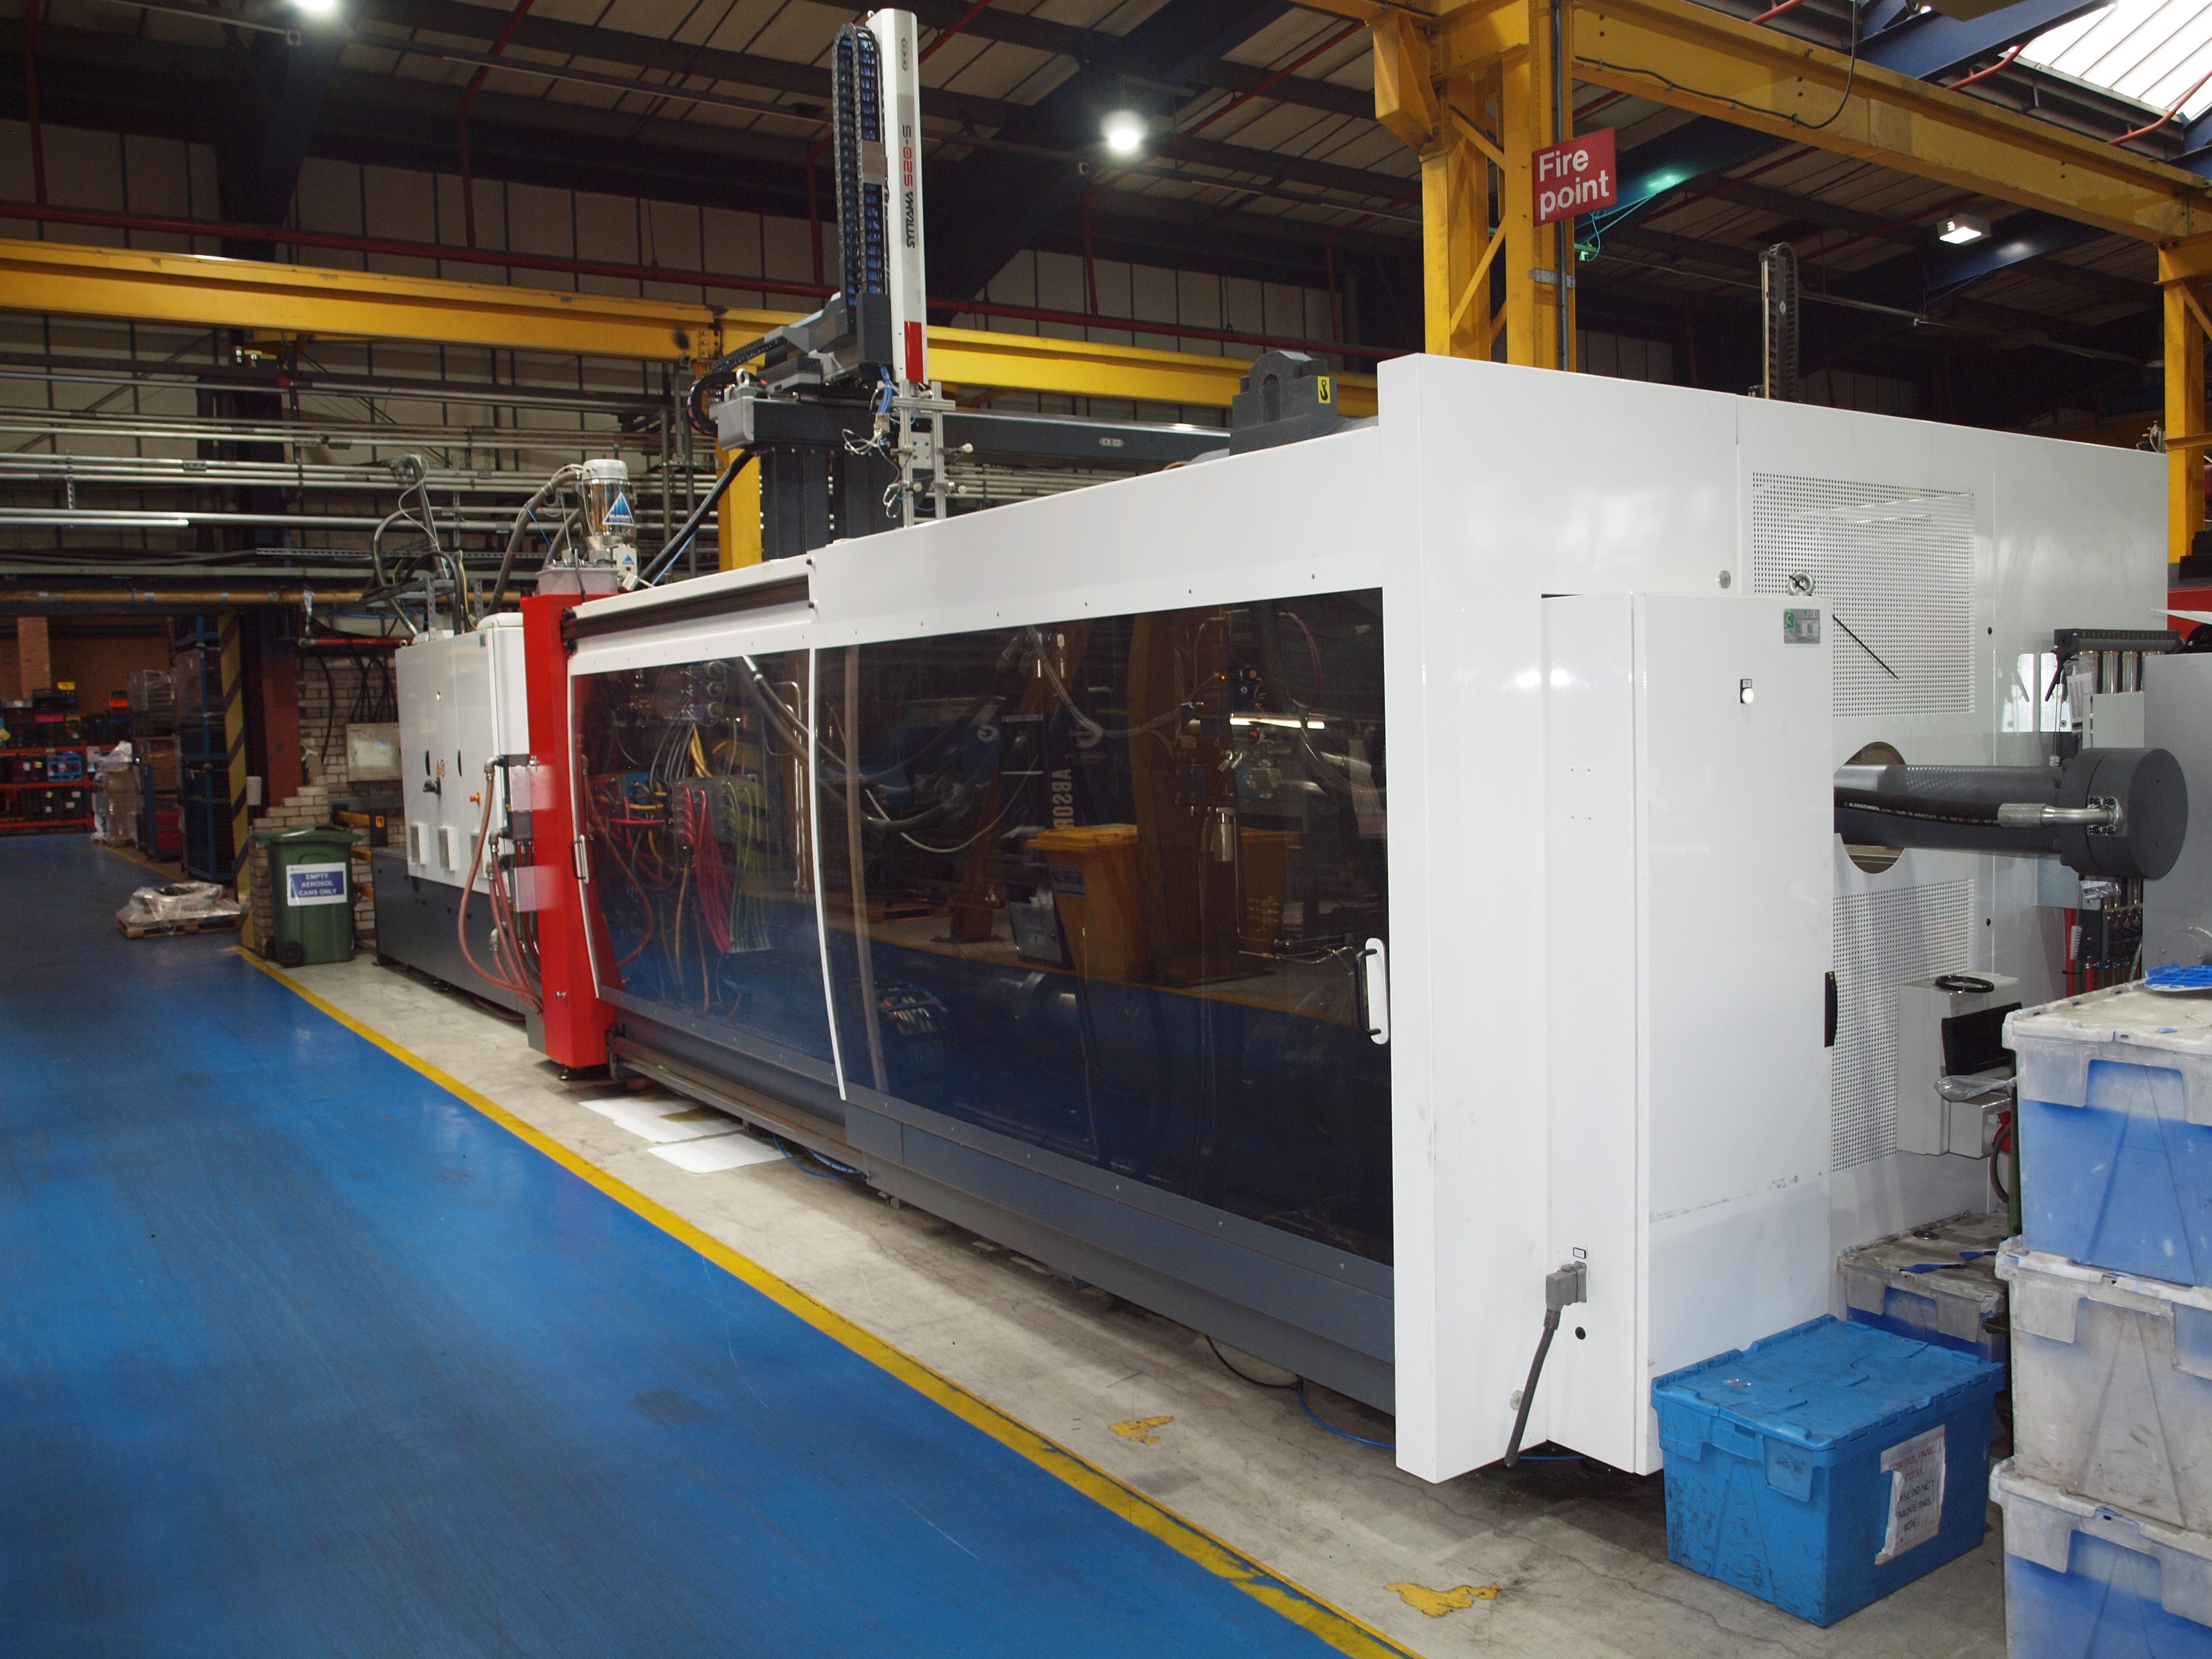 1100t Negri Bossi Injection Moulding machine equipped with a Sytrama cartesian robot